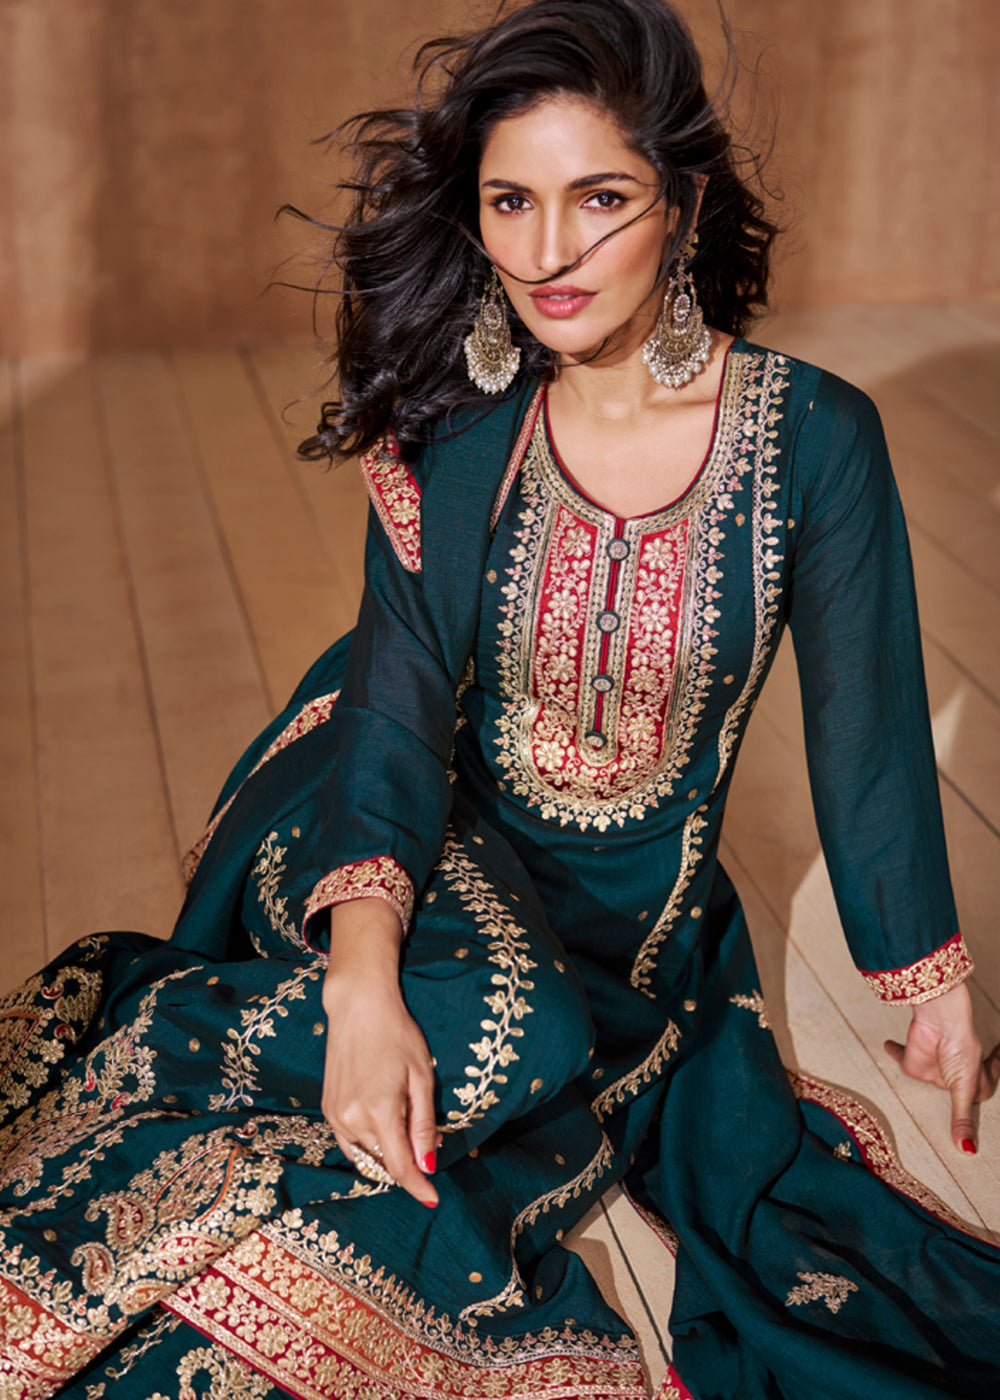 Buy Now Prussian Blue Premium Silk Designer Palazzo Style Suit Online in USA, UK, Canada, Germany, Australia & Worldwide at Empress Clothing.